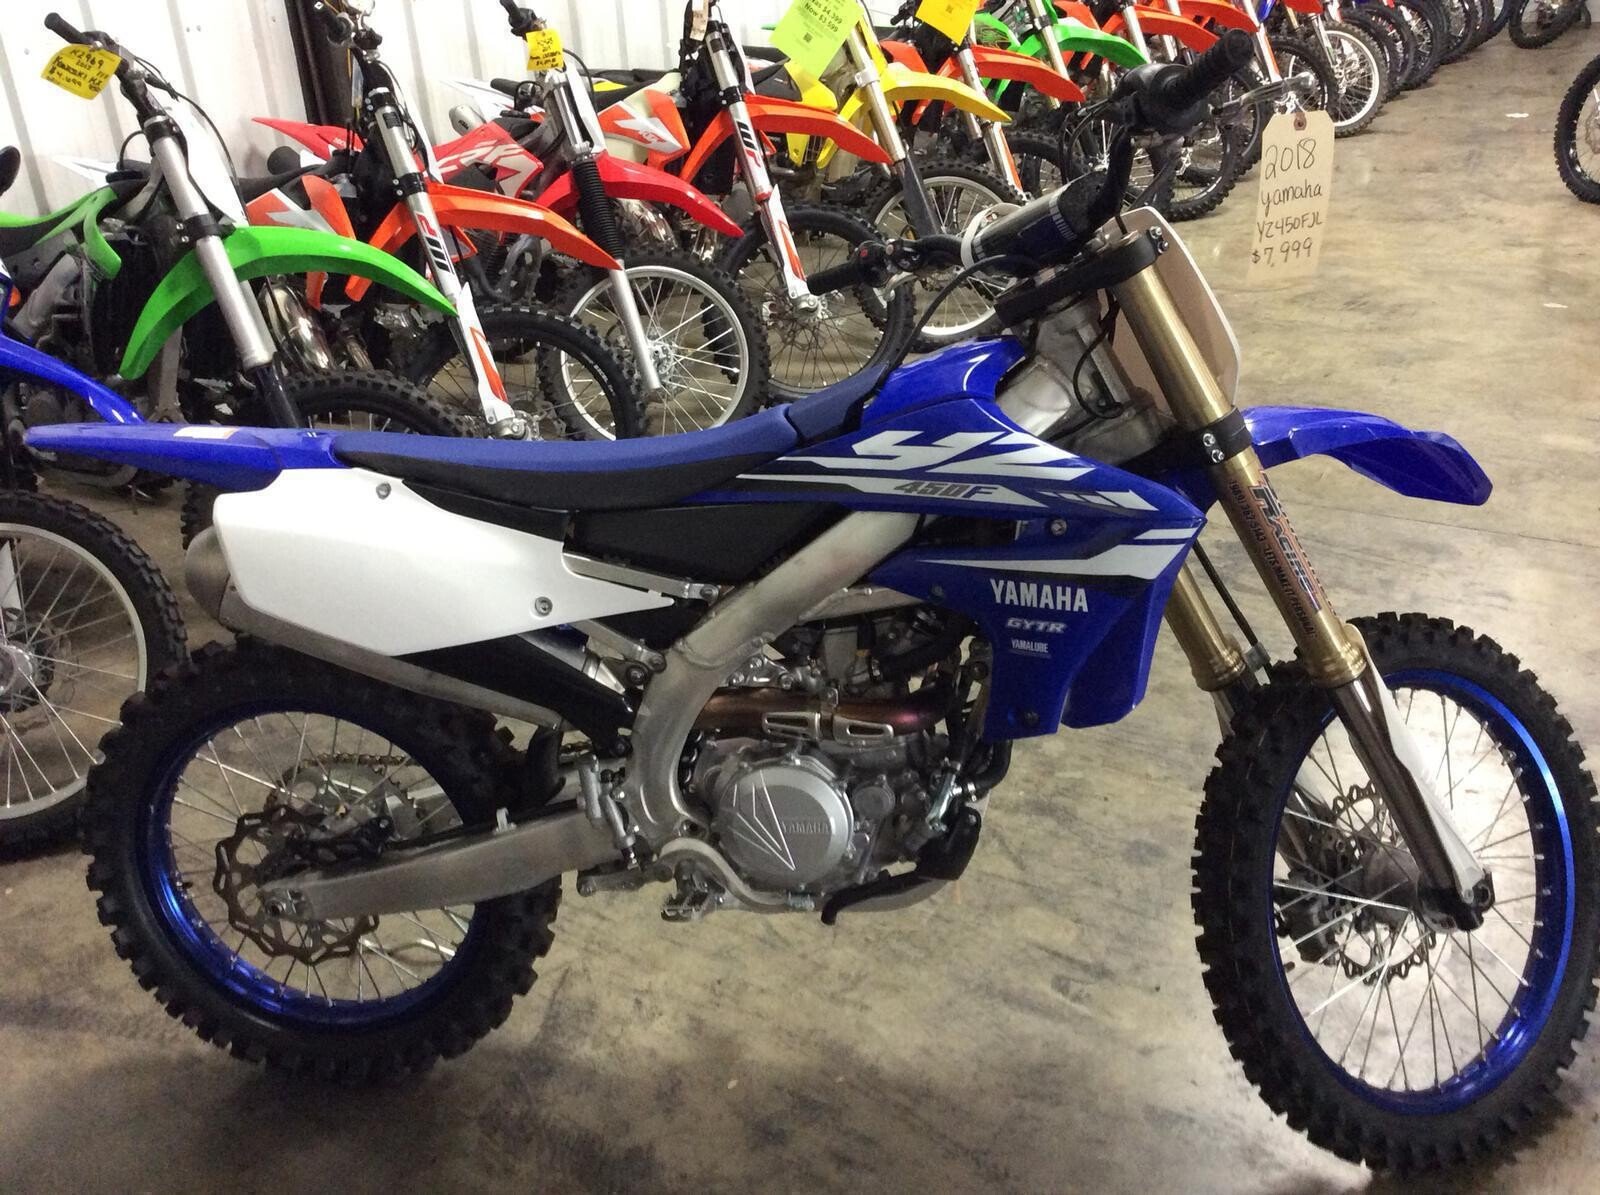 2018 Yamaha YZ450F Motorcycles for Sale 